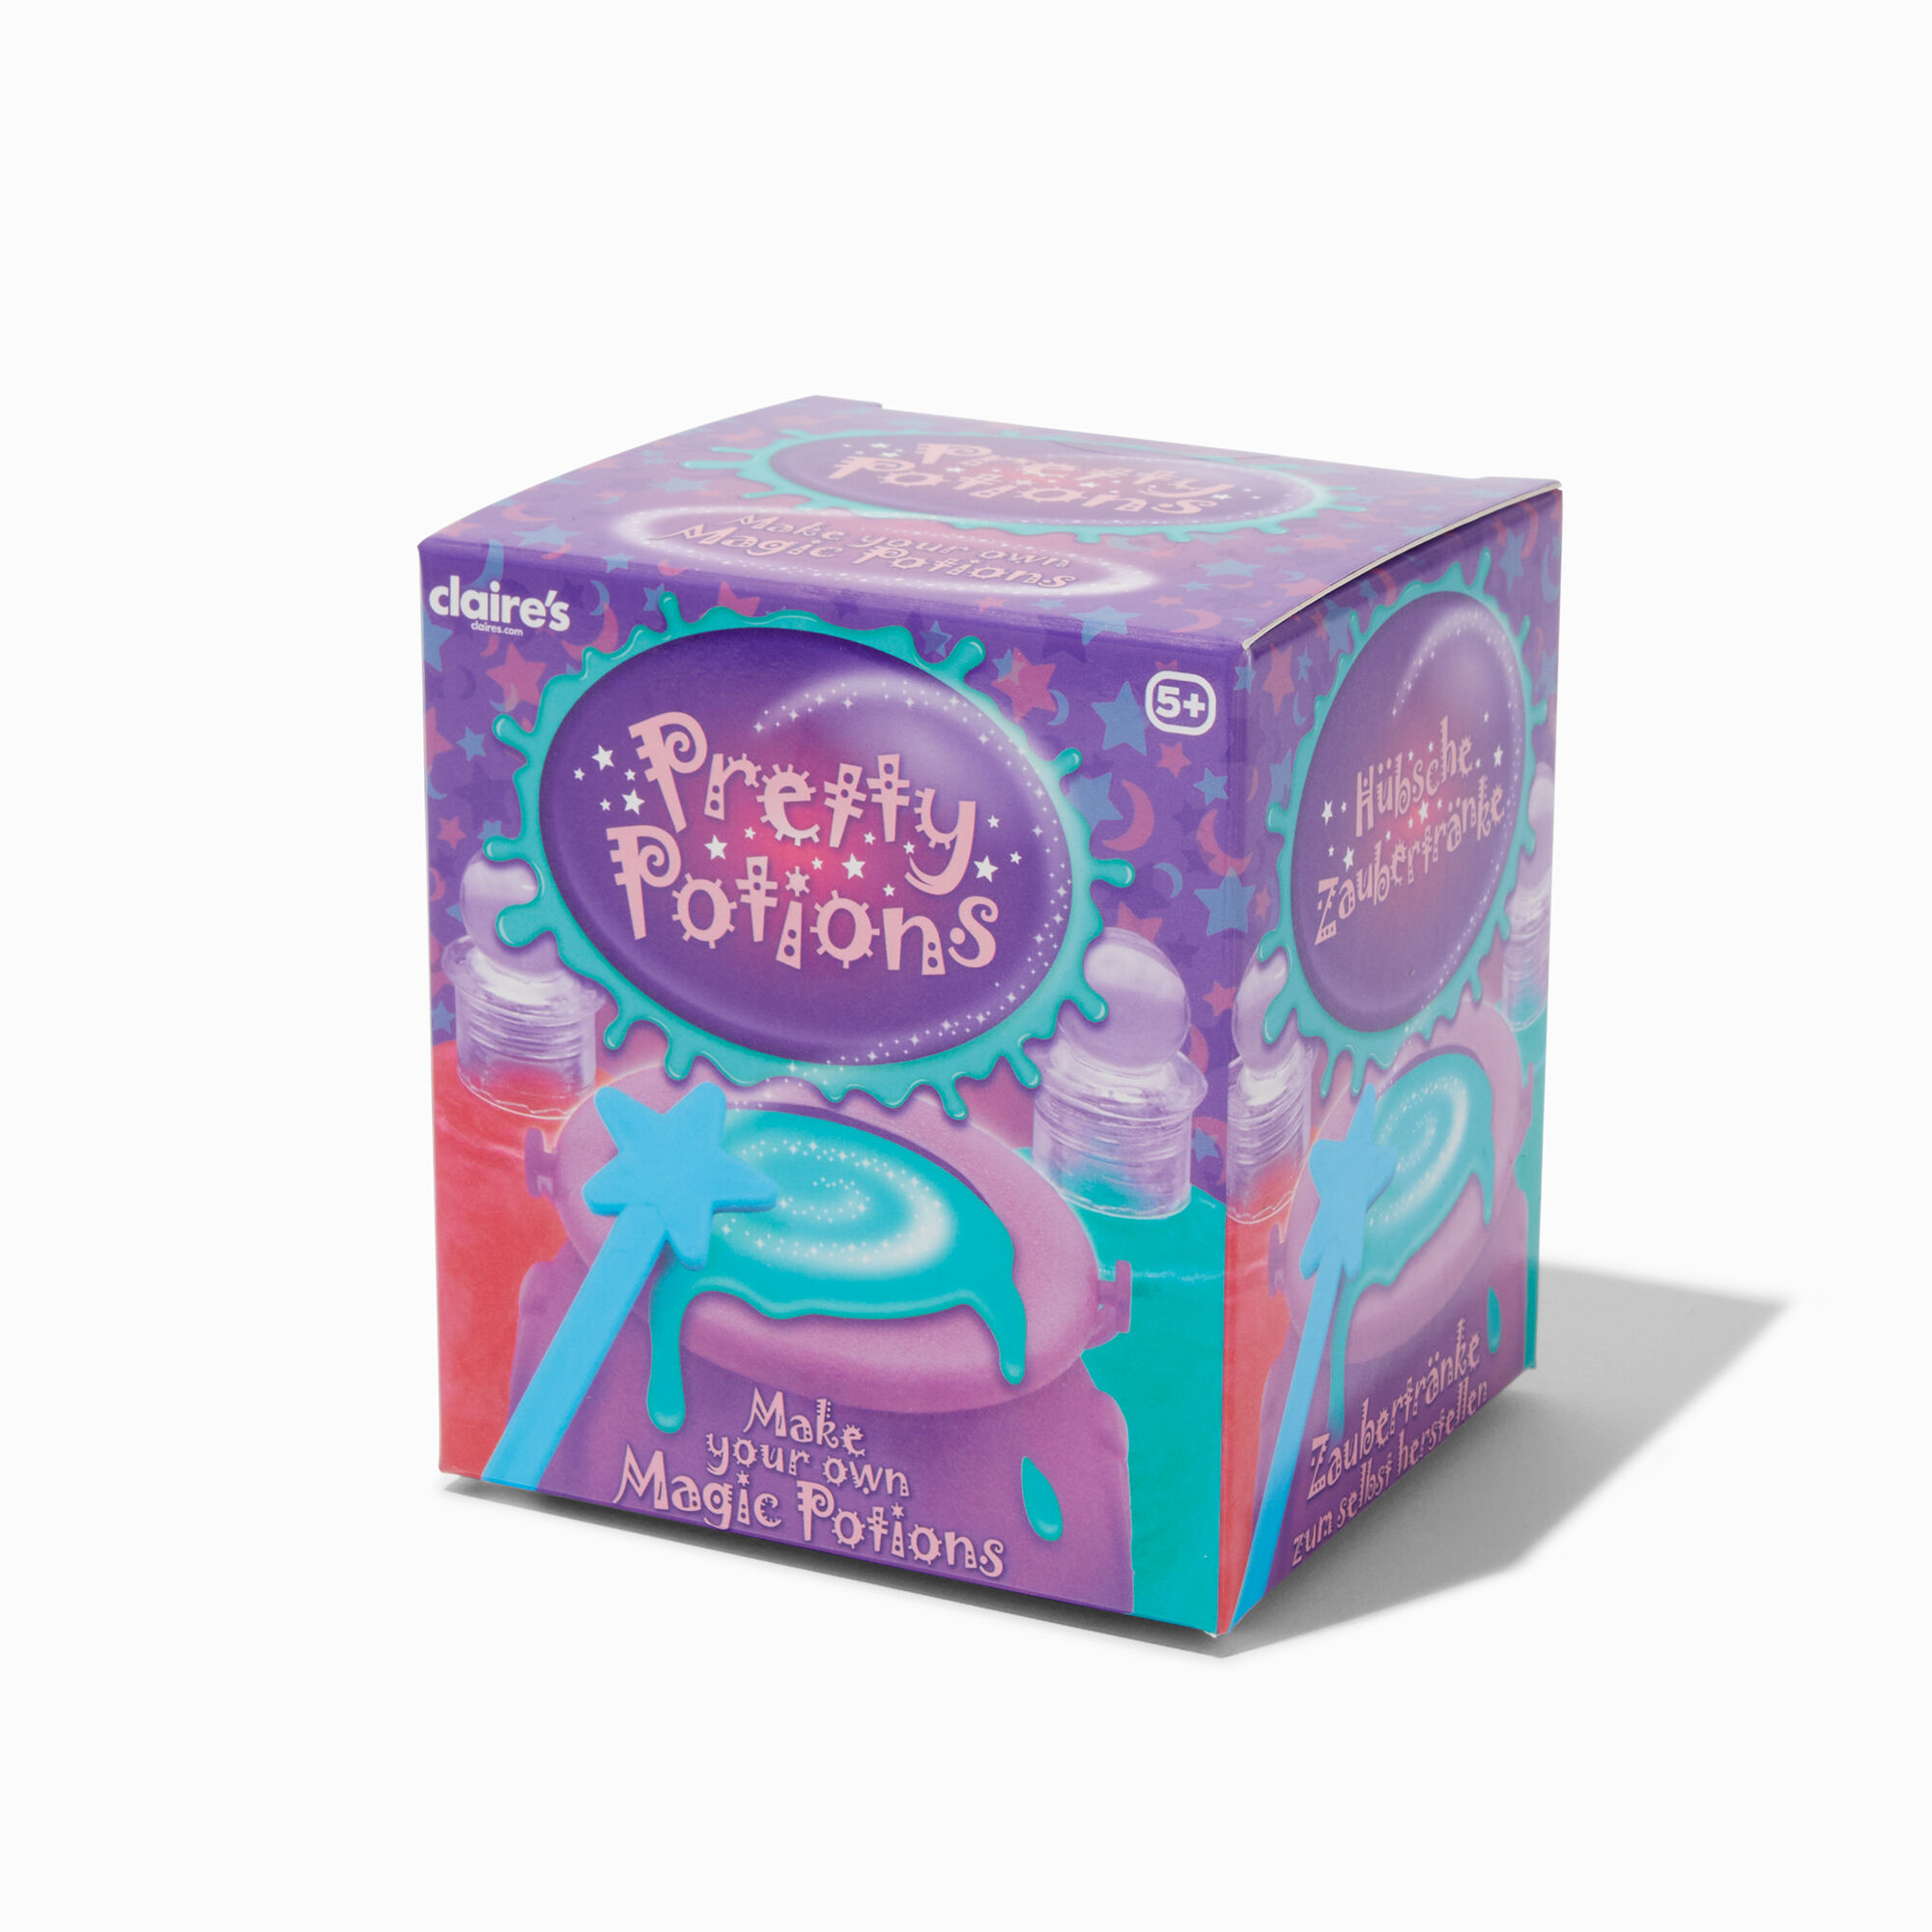 View Claires Pretty Potions MakeYourOwn Magic Kit information